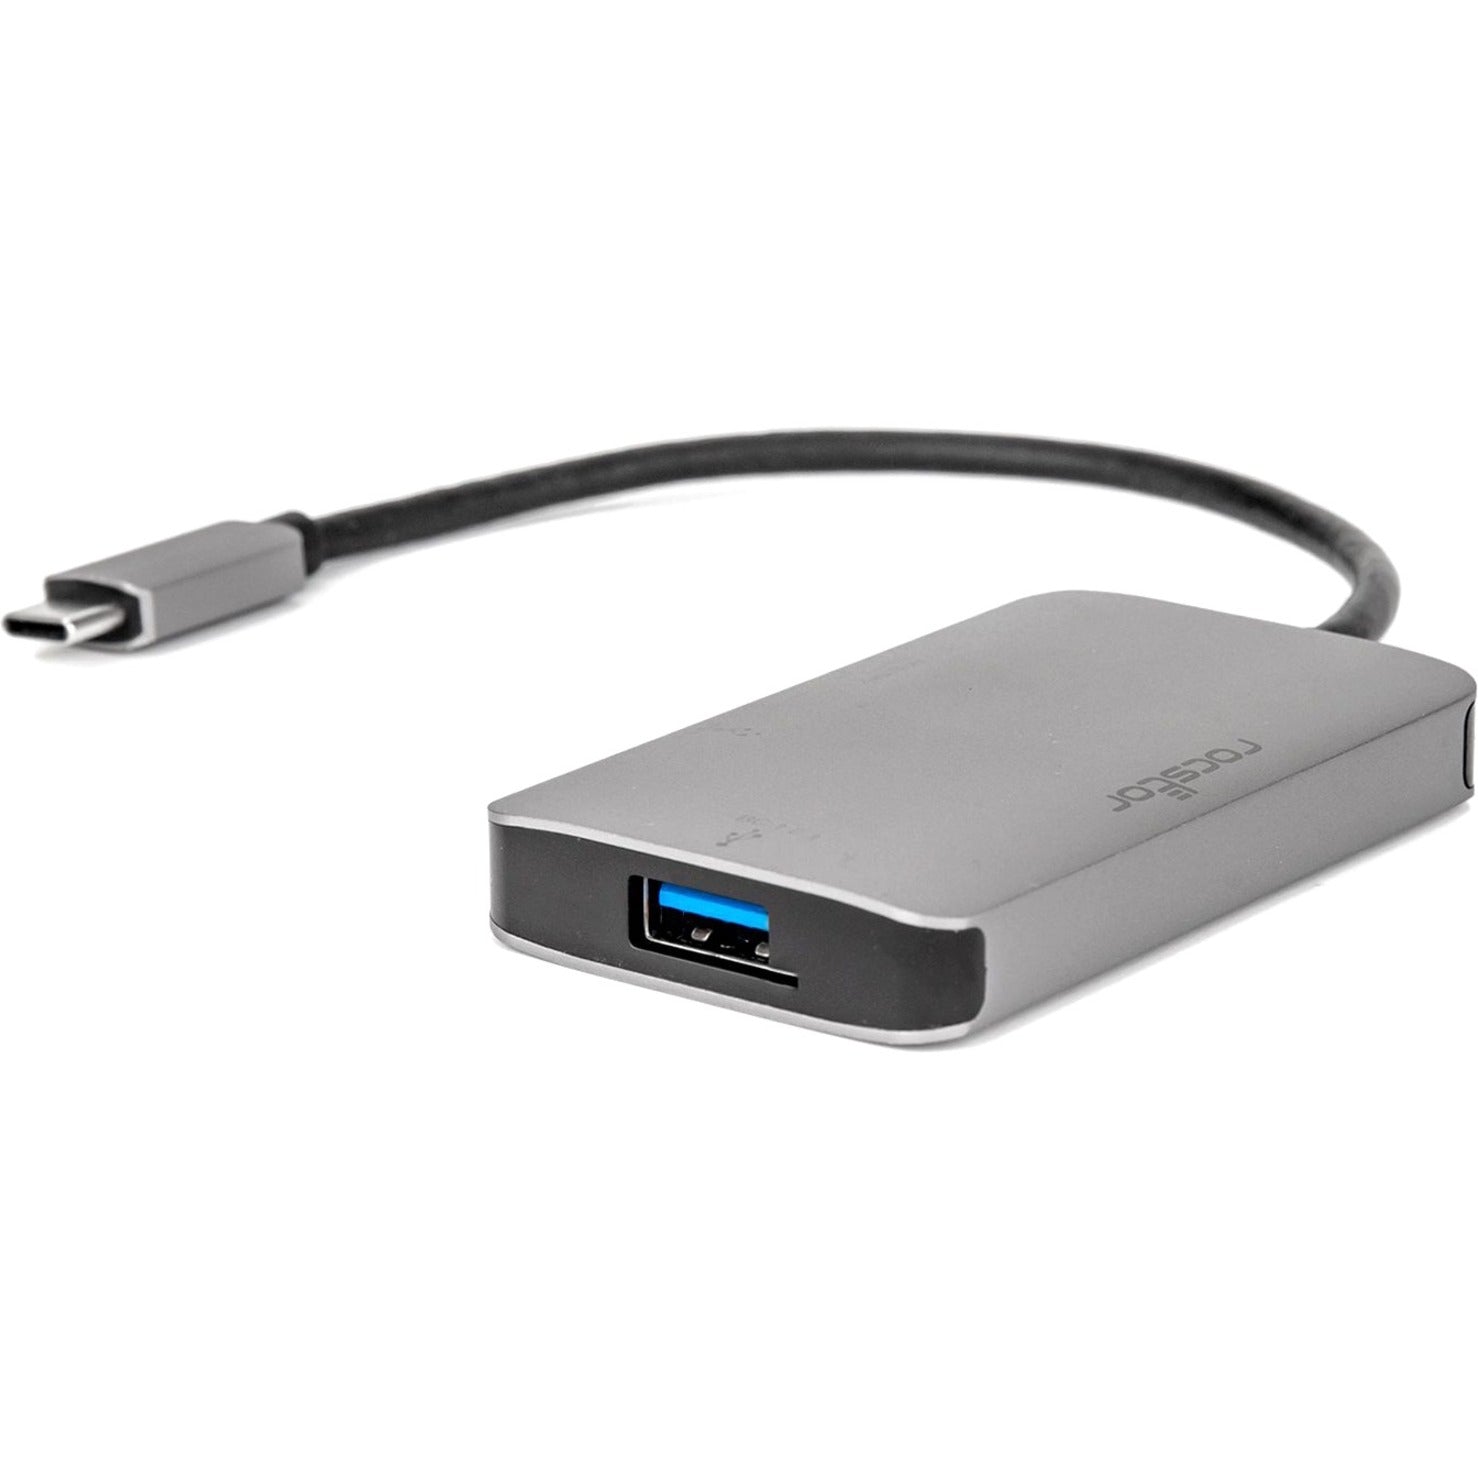 Rocstor Y10A176-S1 USB-C to HDMI Multiport Adapter - USB-C to HDMI/USB-C (3.1)/USB 3.0 Converter, Silver